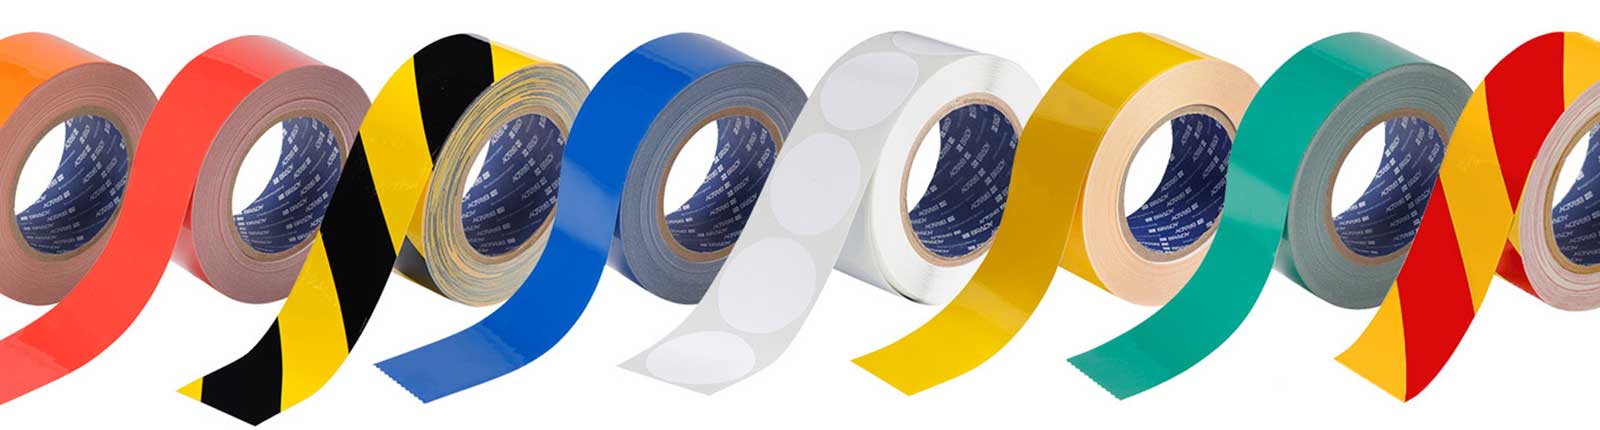 3 GRAY Solid Color Tape - 100' Roll - Safety Floor Tape